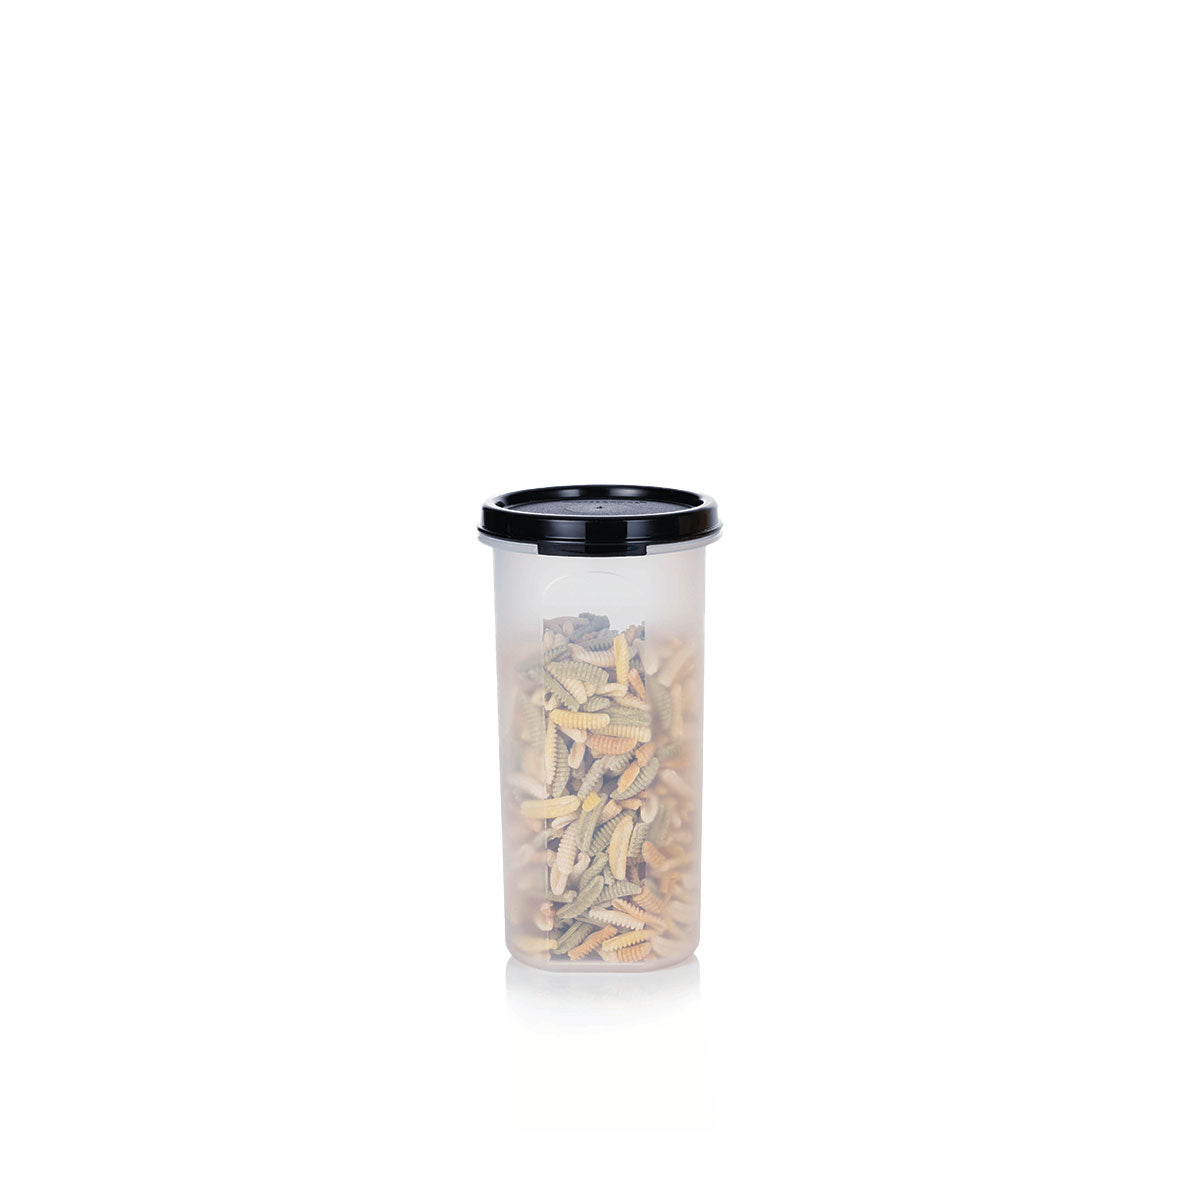 Modular Mates® Round 3 container with seal